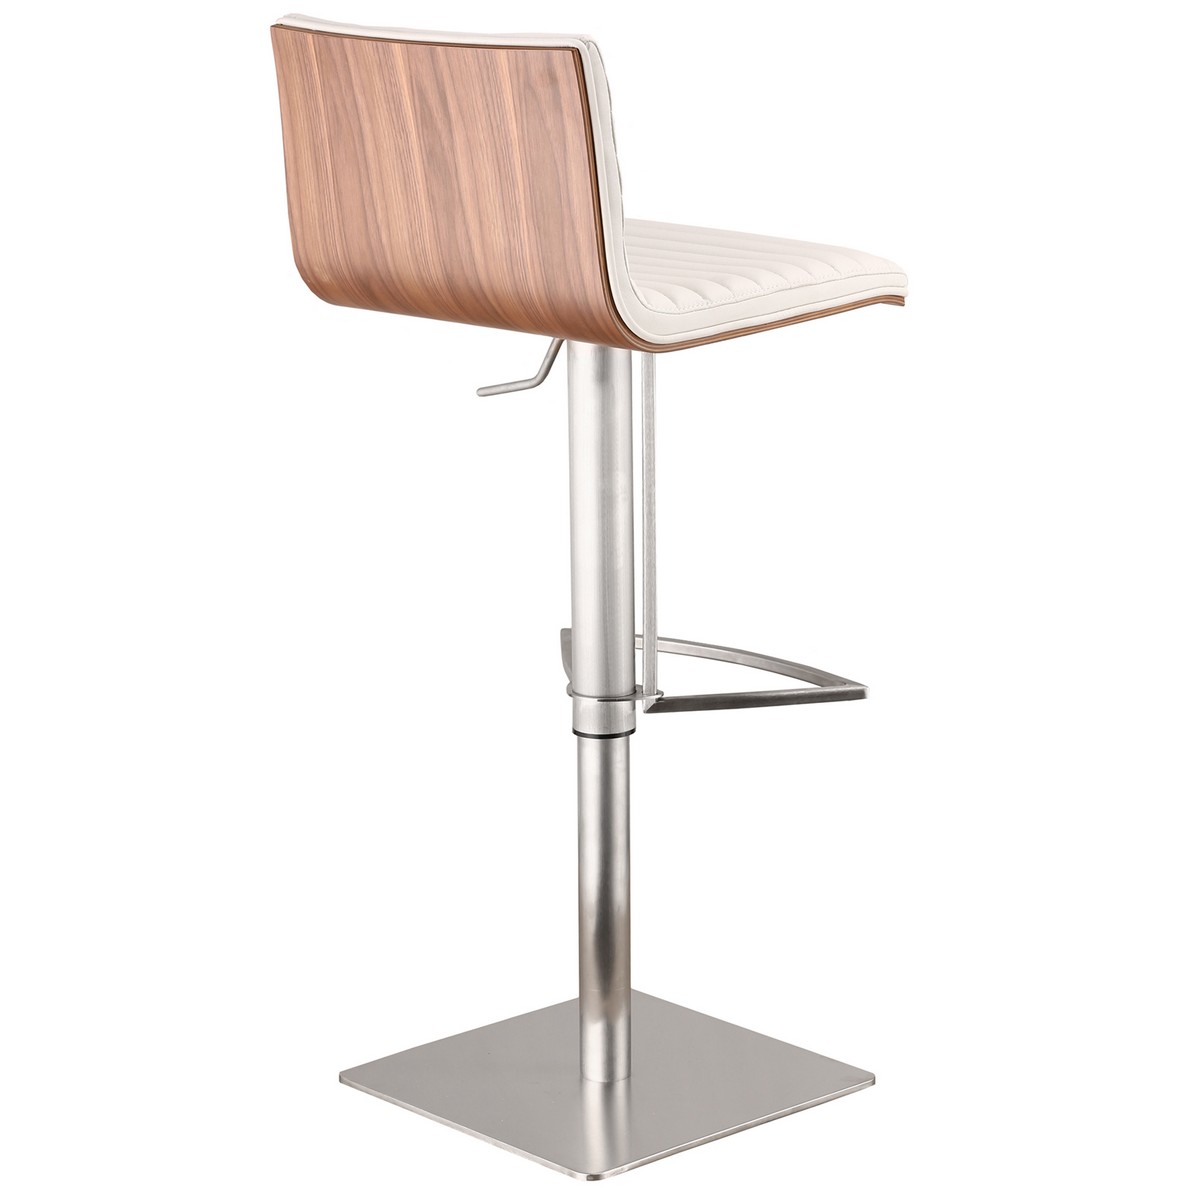 Armen Living Cafe Adjustable Brushed Stainless Steel Barstool in White Leatherette with Walnut Back